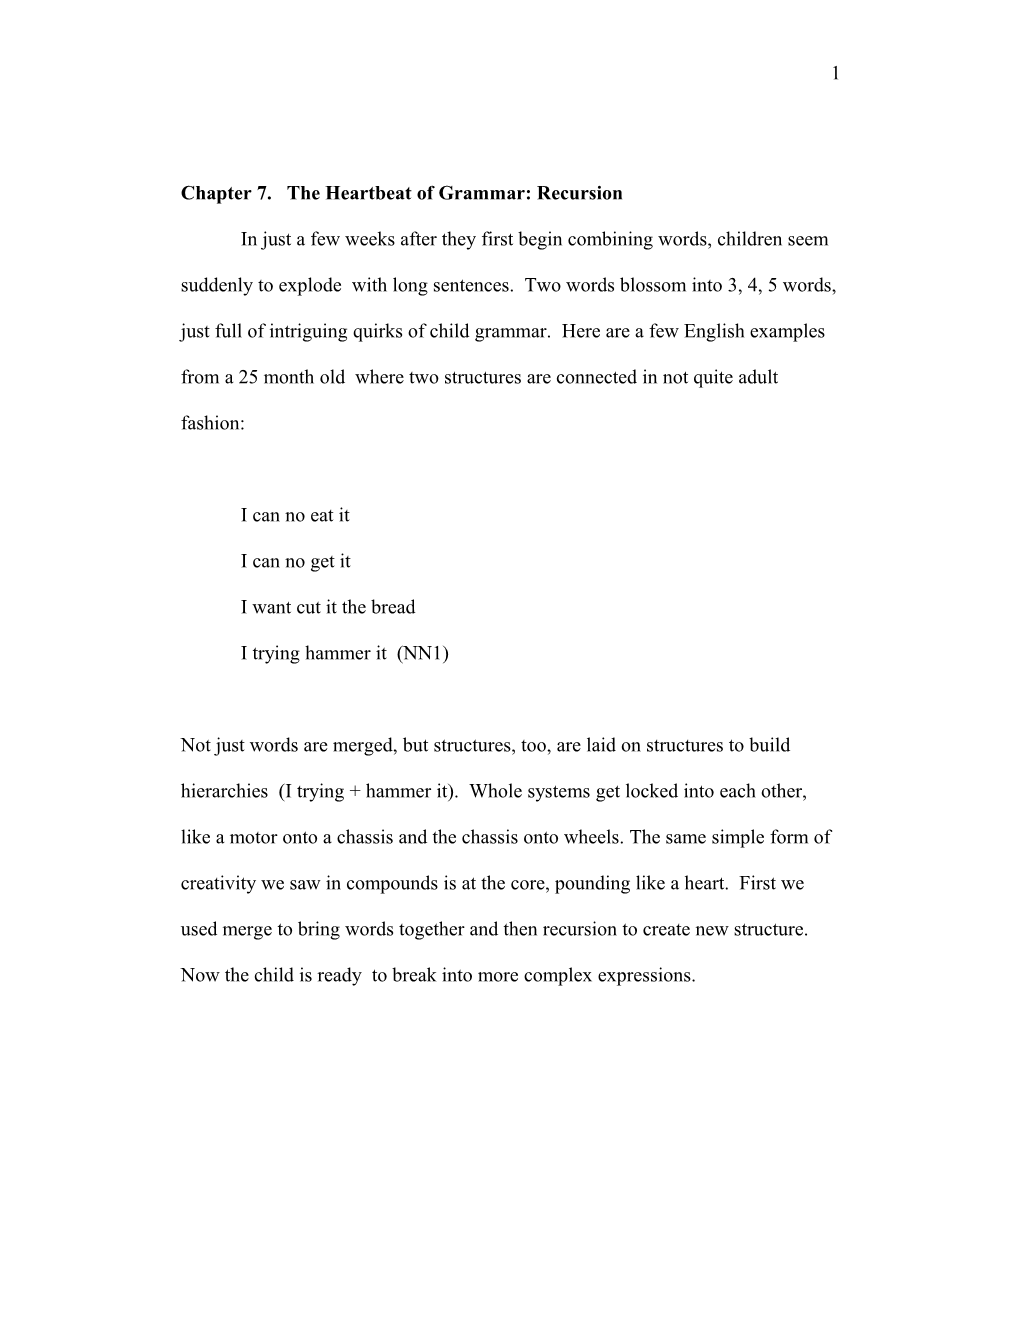 Chapter 4 the Heartbeat of Grammar: Recursion